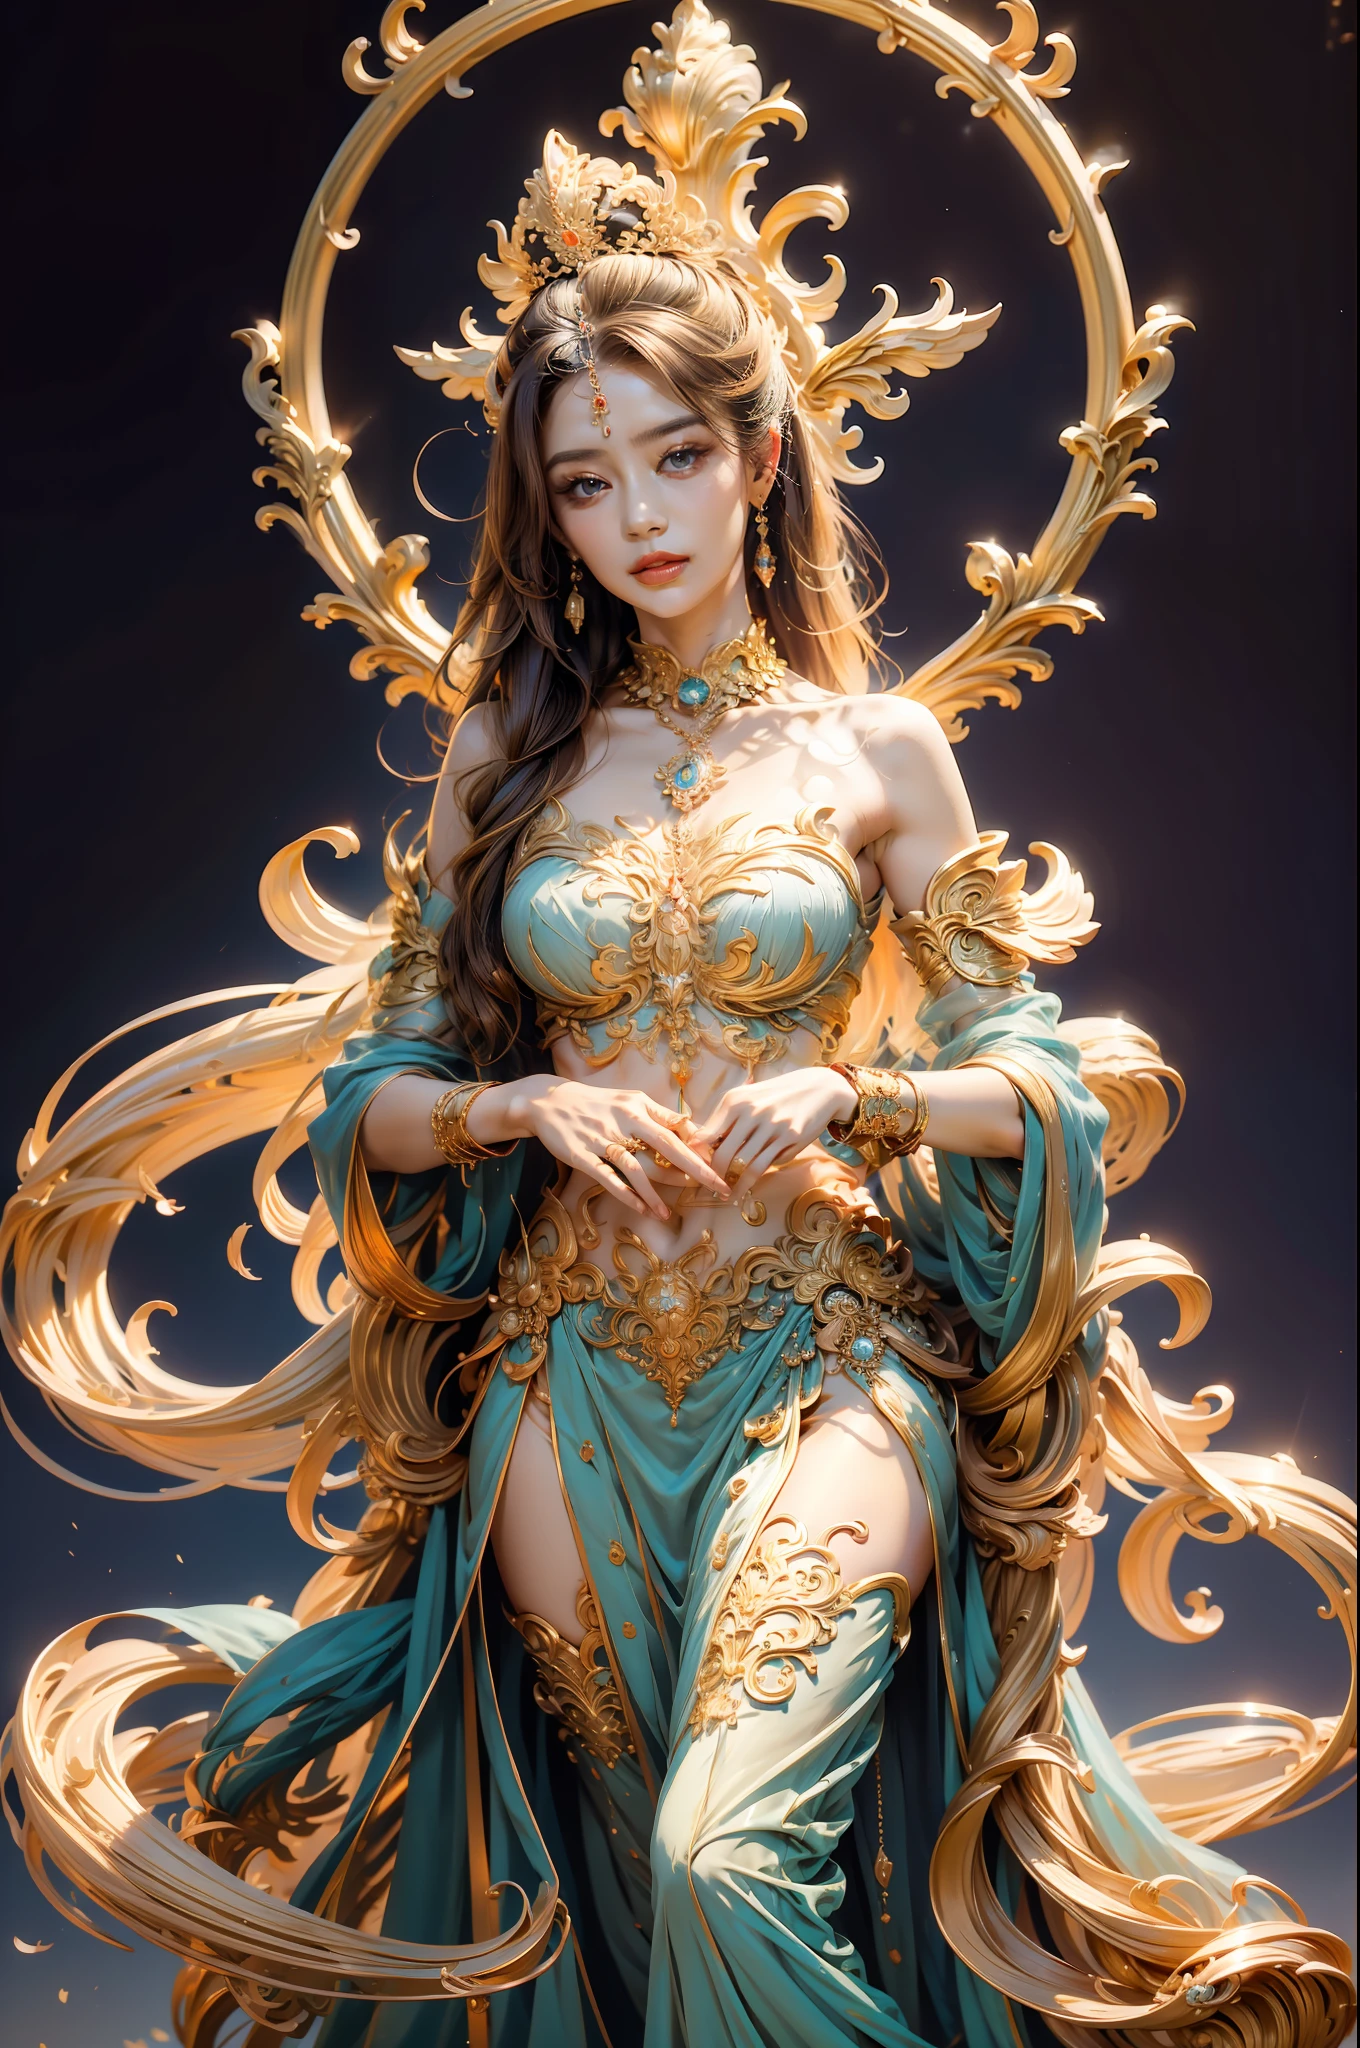 The queen who stands tall，Elegant temperament，mystical ambiance，Best quality、tmasterpiece、A high resolution、1girll、Sheer silk porcelain dress、Nice face、Busty body，hair adornments、looking at viewert、ssmile、Shut your mouth、cparted lips、shift dresses、hair adornments、choker necklace、jewely、long whitr hair、耳Nipple Ring、pretty  face、（Keep one's mouth shut），Sit in a golden chair，Ancient mythology、Ancient palaces，Luxurious and detailed background、hentail realism、profesional lighting、edge lit、bicolor lighting、（highdetailskin：1.2）、8K, Ultra HD、Digital SLR、softlighting、high high quality，Volumetriclighting，photore，High resolution 4K，8K，blur backgroun，hight contrast，largeaperture，automatic white balance，cinematic compositions，realisticlying，（from below）。